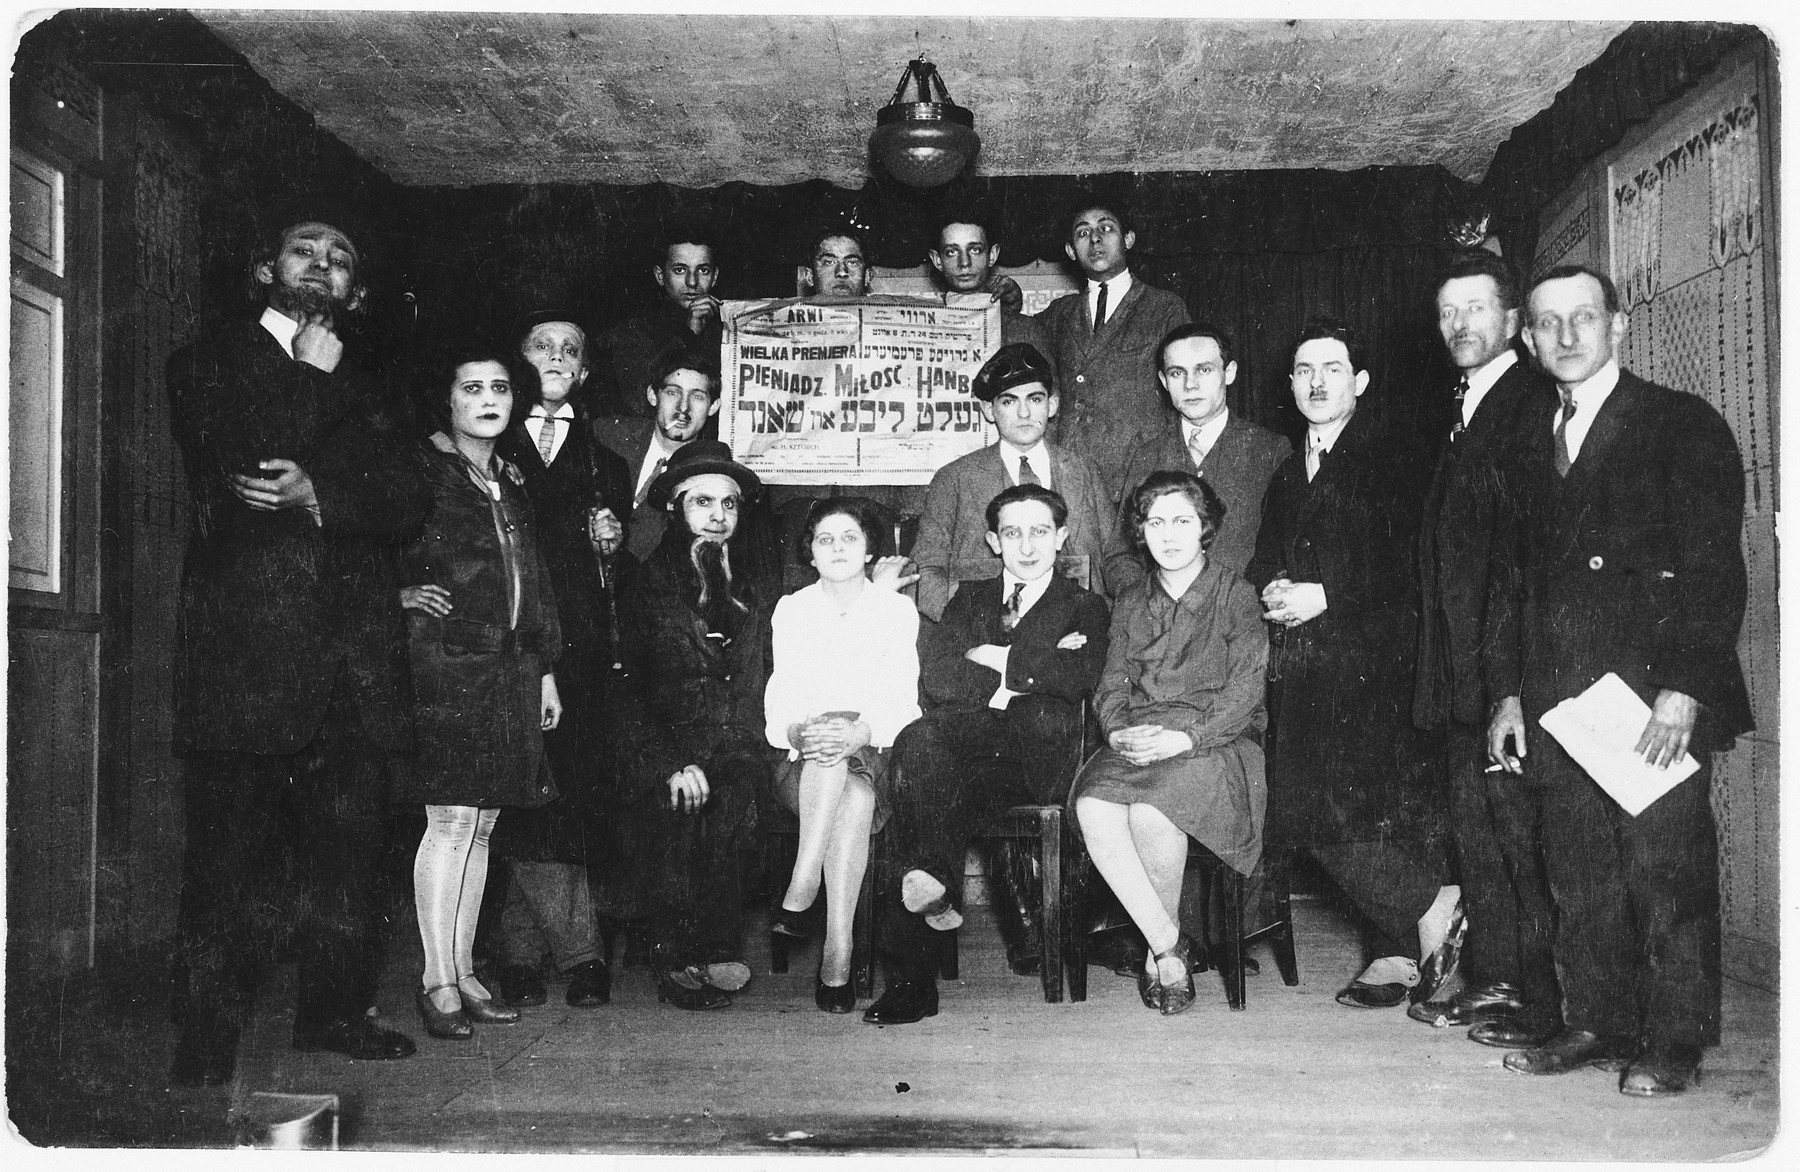 Members of the Bundist theater group "Arvi" perform the "Money, Love and Shame".

Heniek Storch (seated first row, second from right) directed the production.  Also pictured is Szmerling (extreme right).